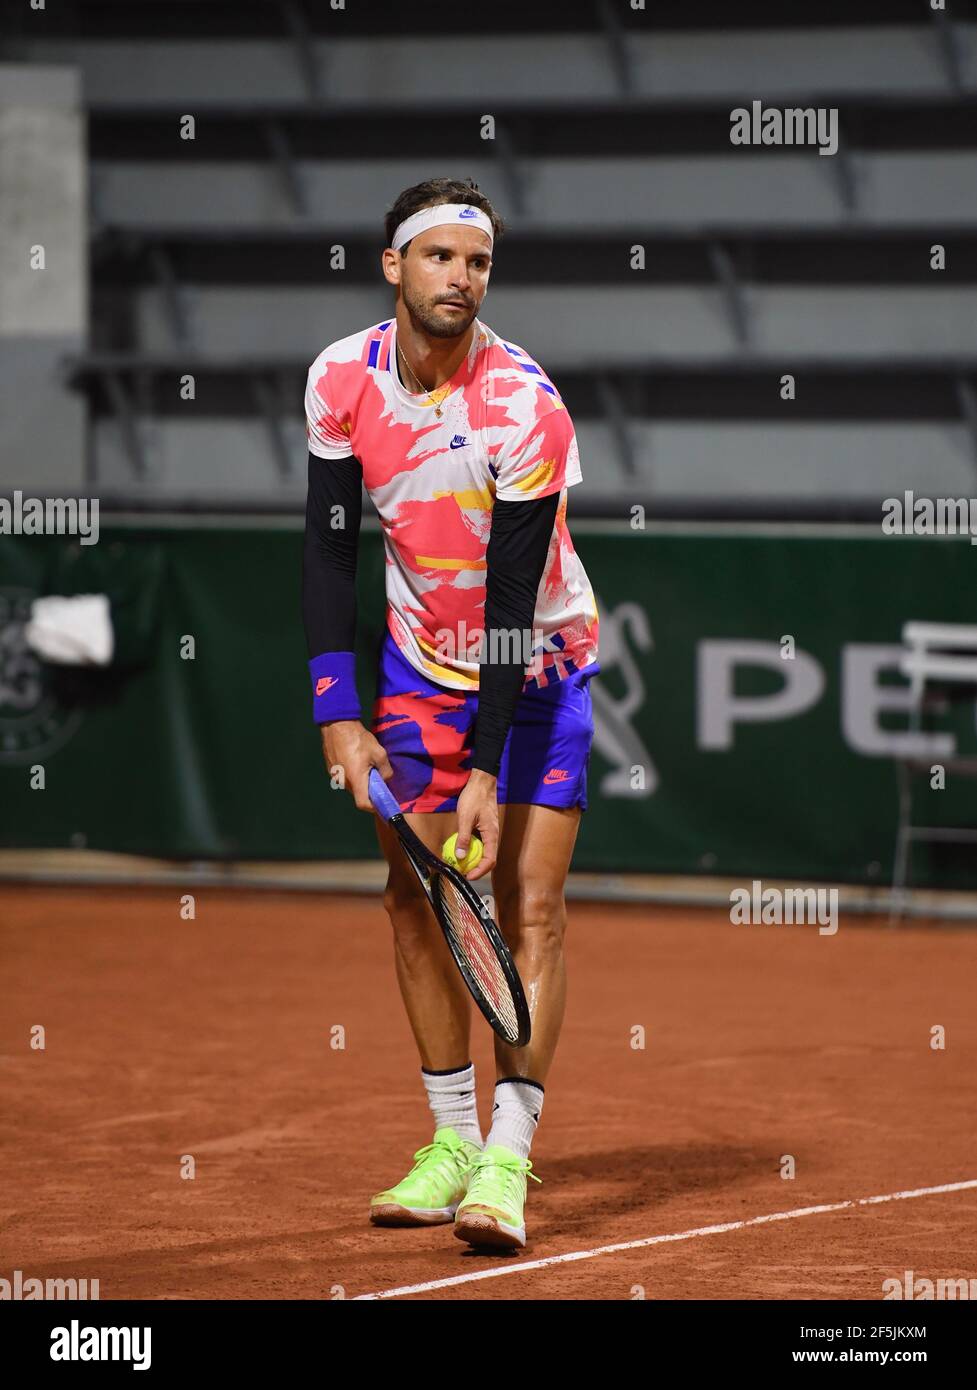 Grigor Dimitrov serving at the French Open (Roland Garros 2020) during his first round against Grégoire Barrère. Stock Photo